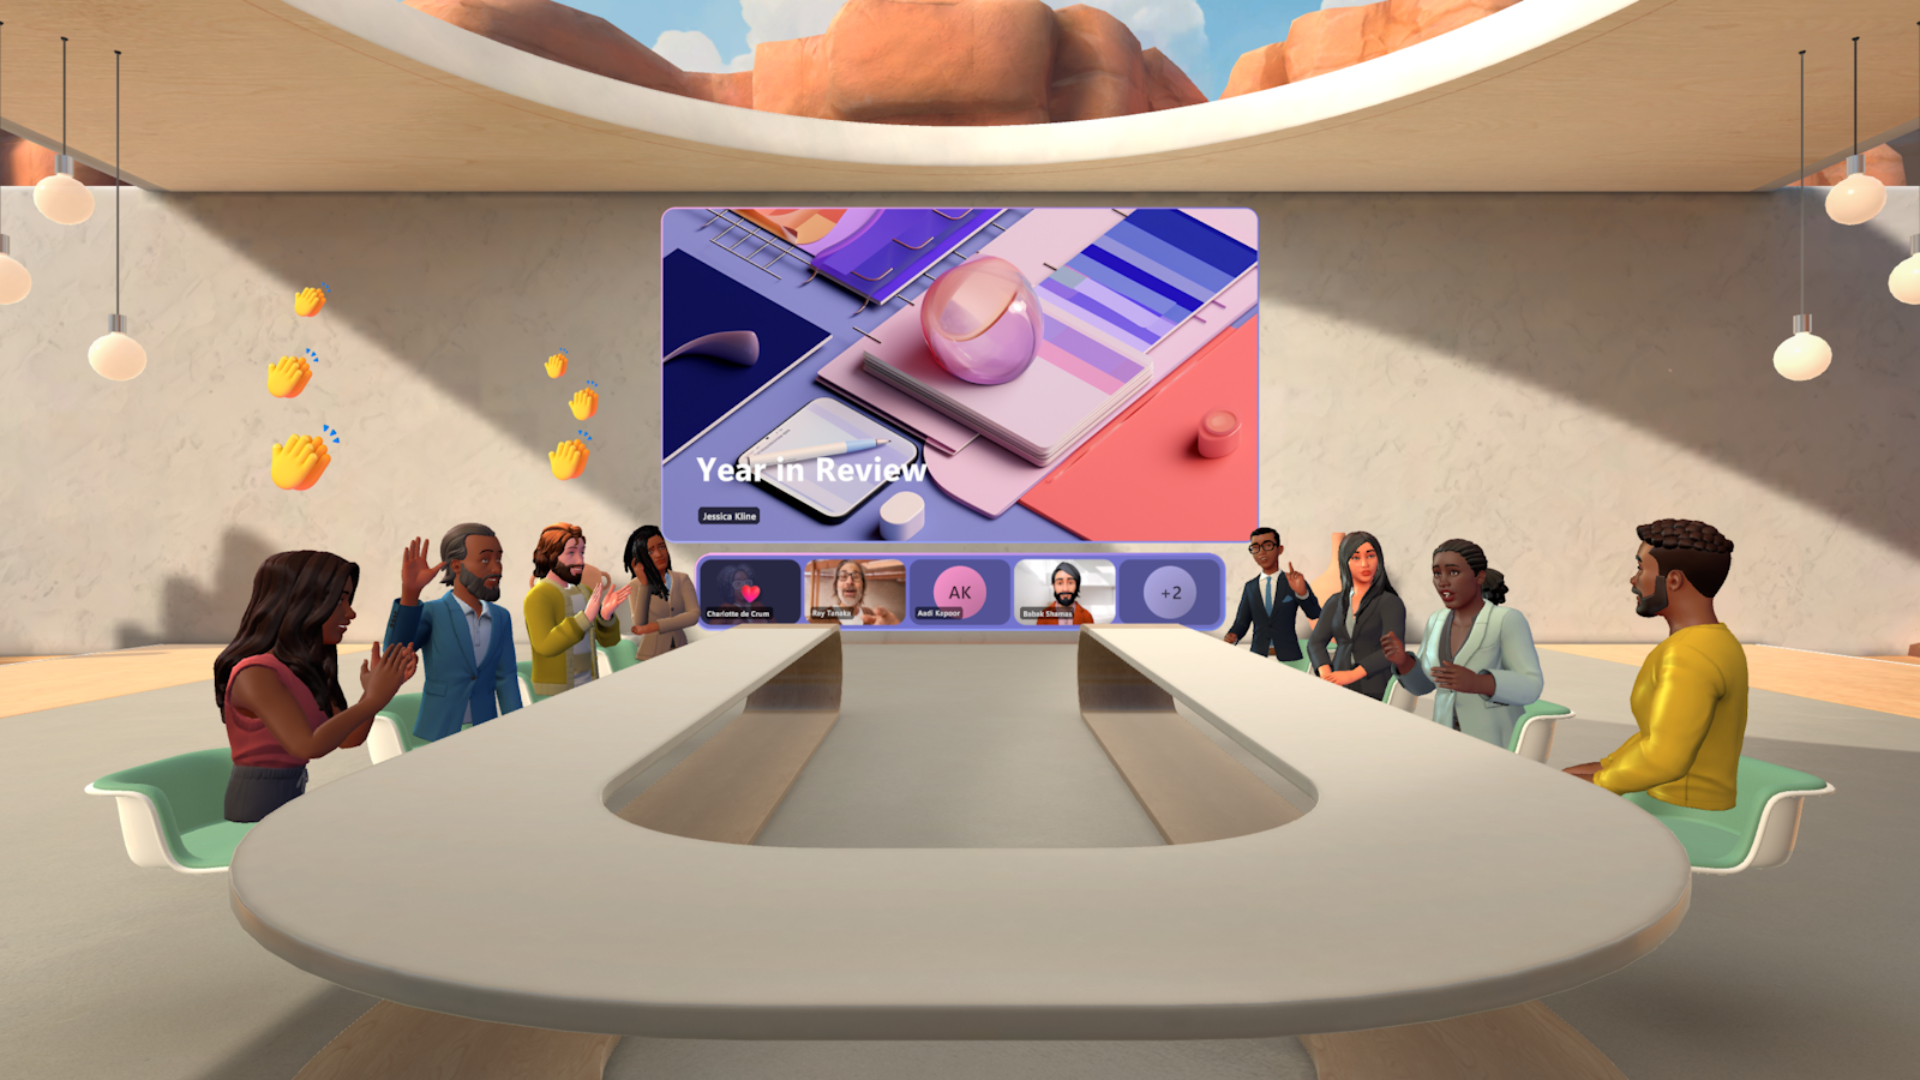 Microsoft Teams will soon enable immersive 3D meetings with avatars